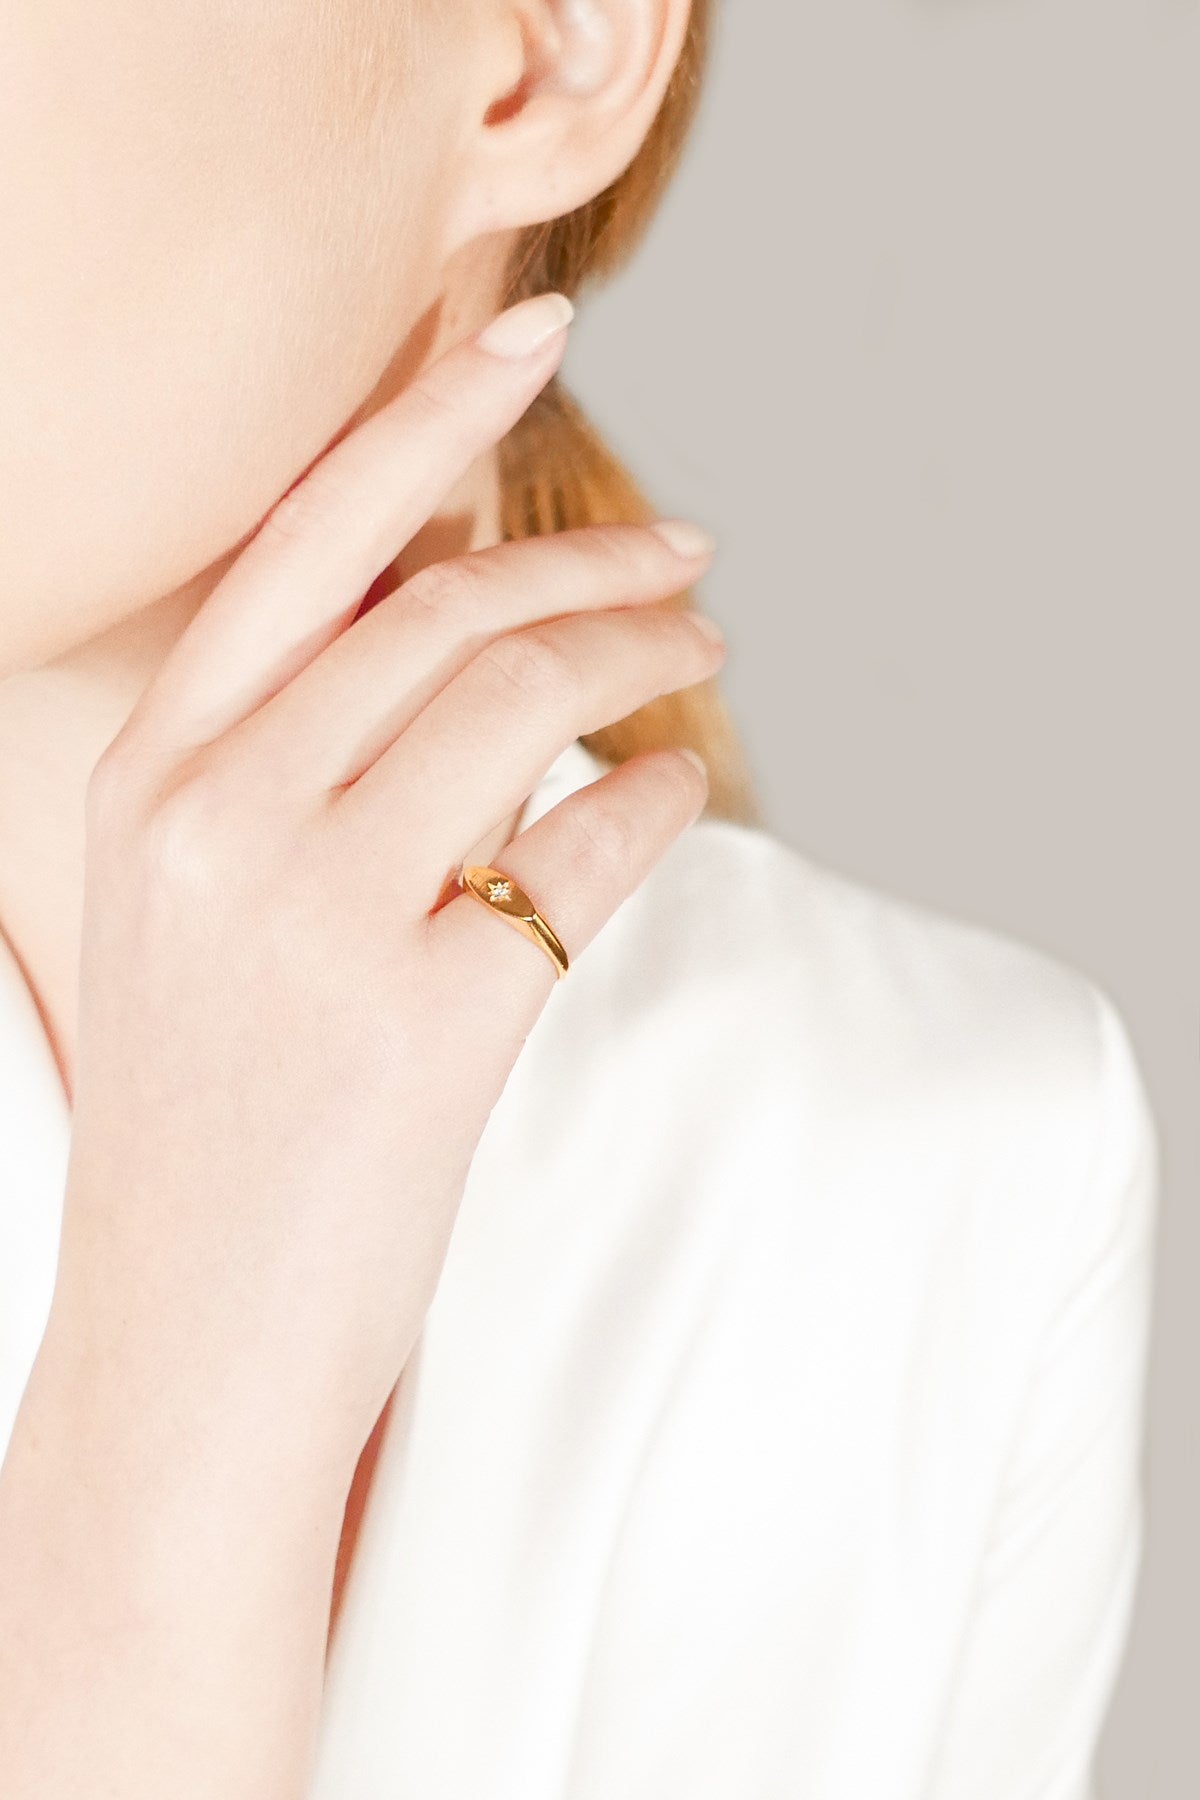 Nord Star Zircon Ring Gold Plated